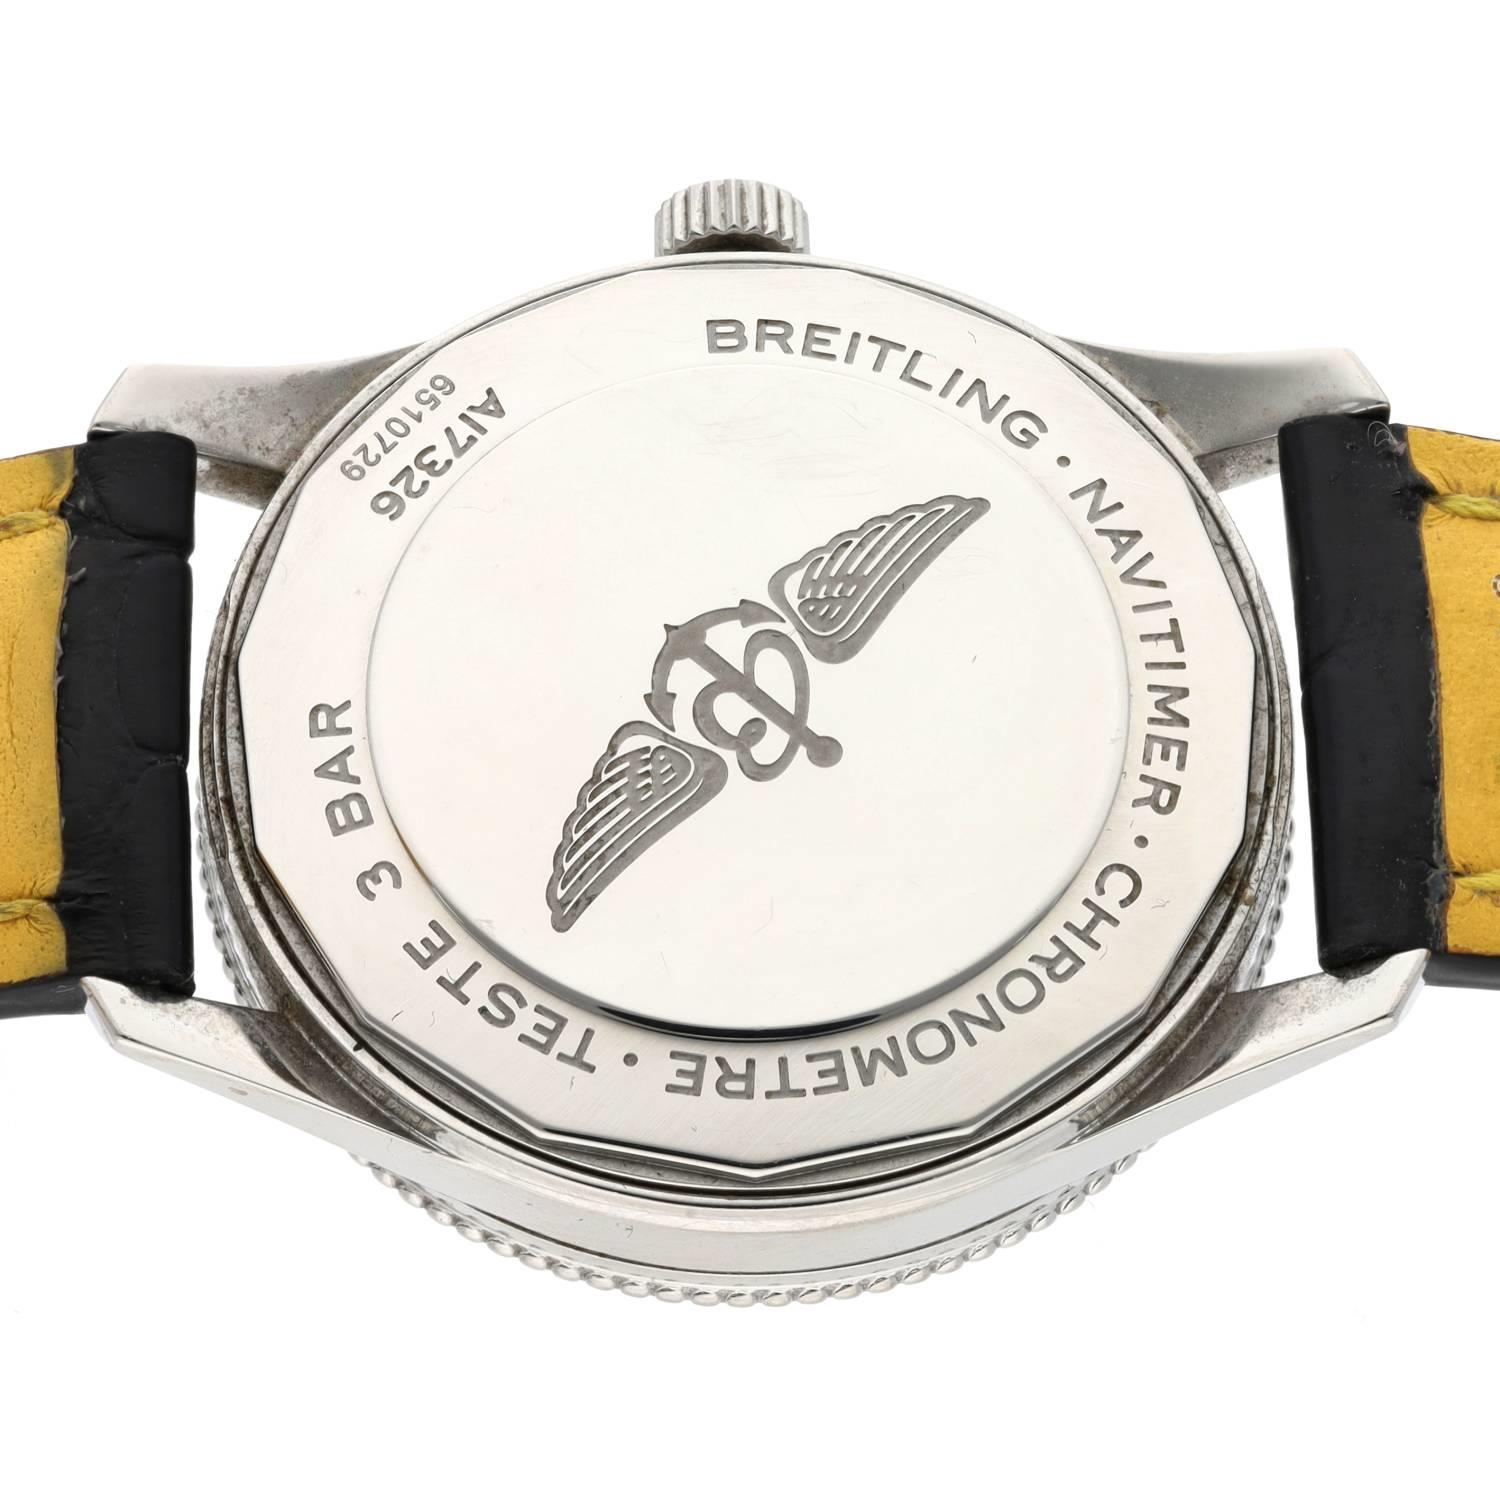 Breitling Navitimer Chronometer automatic stainless steel gentleman's wristwatch, reference no. - Image 2 of 2